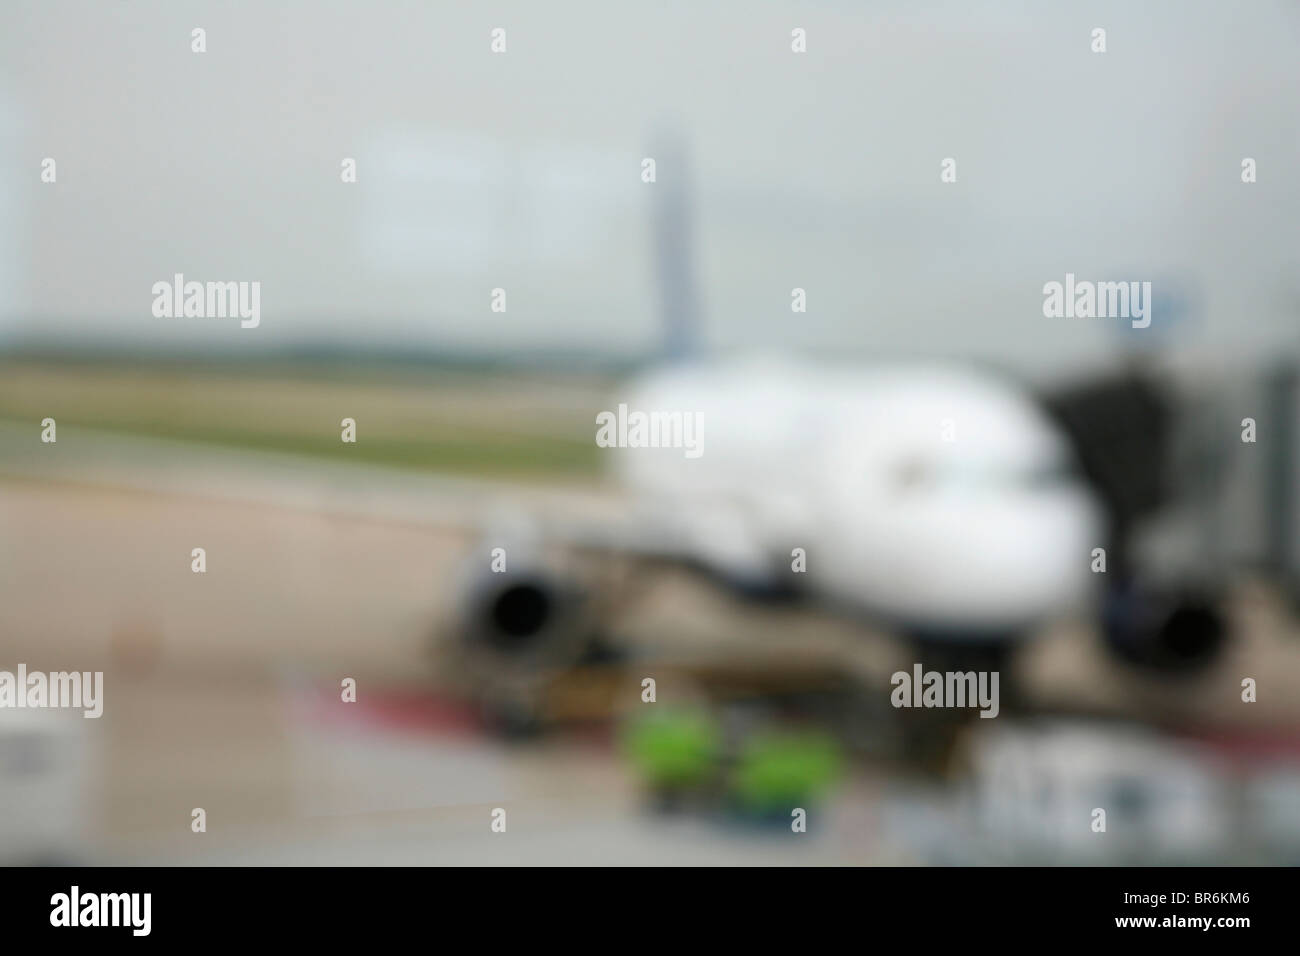 A plane on an airport tarmac, defocused Stock Photo